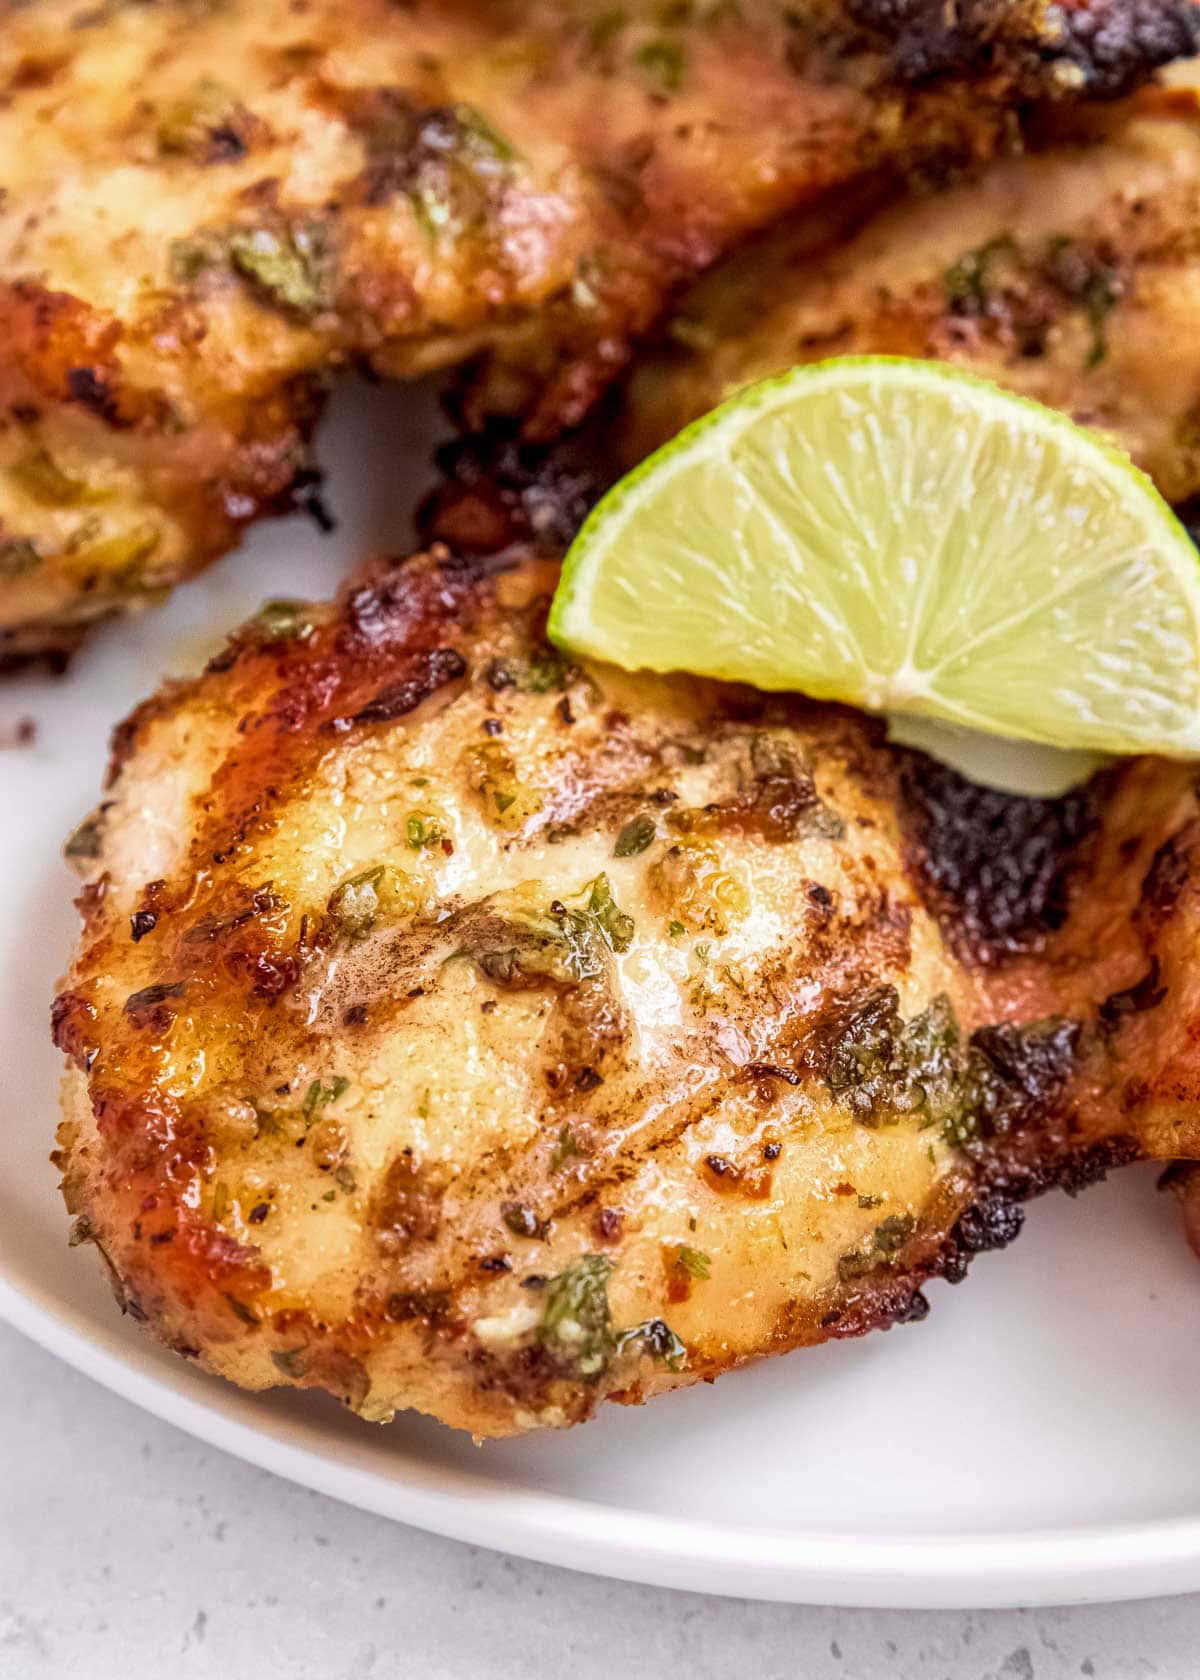 These Juicy Grilled Chicken Thighs are the perfect EASY keto dinner! This recipe is healthy, absolutely delicious, and great for meal prep.